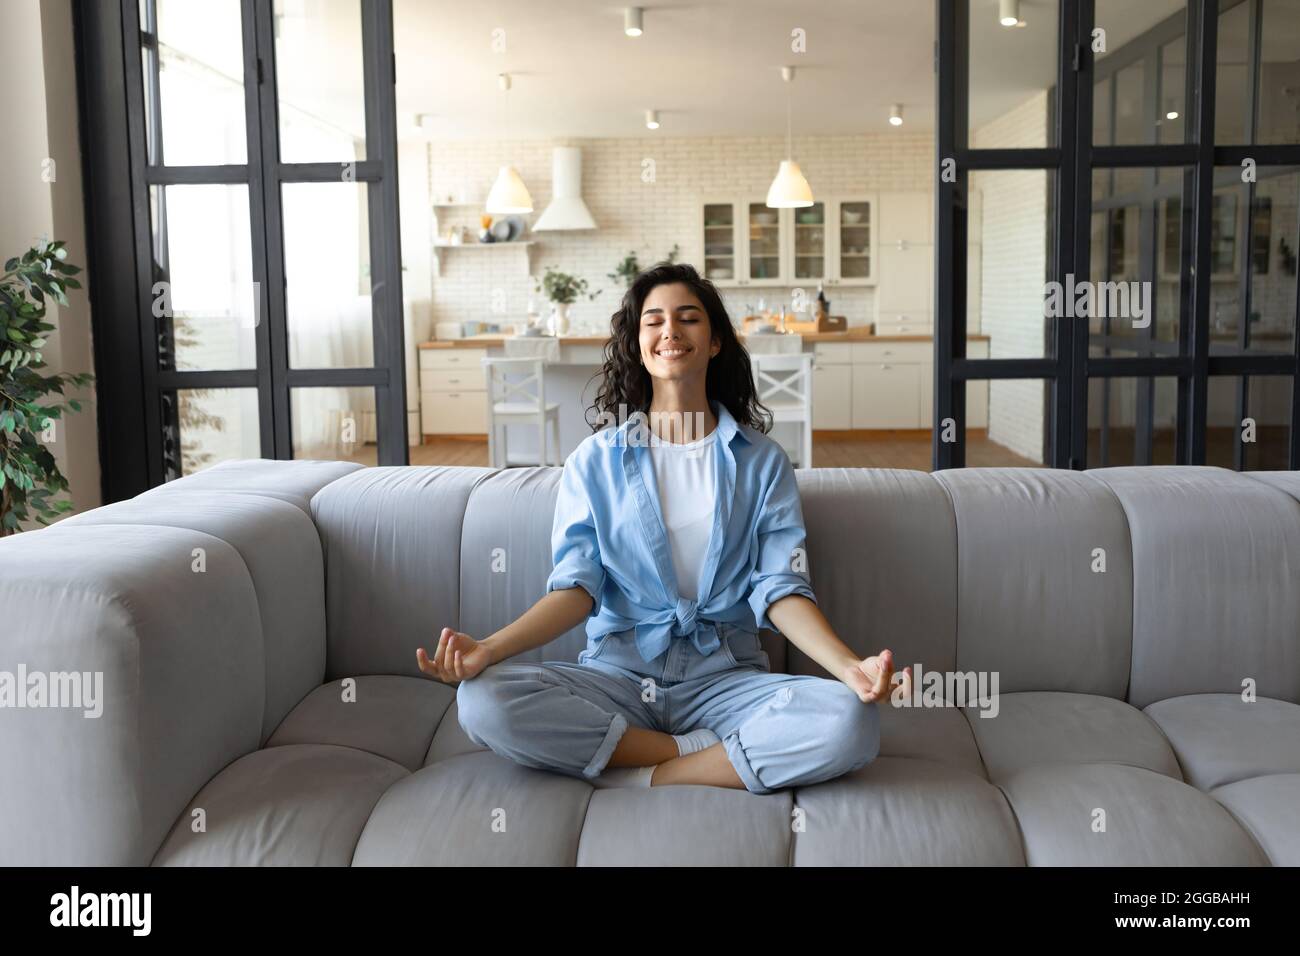 Stress management. Peaceful young lady in casual wear meditating with closed eyes on couch at home Stock Photo